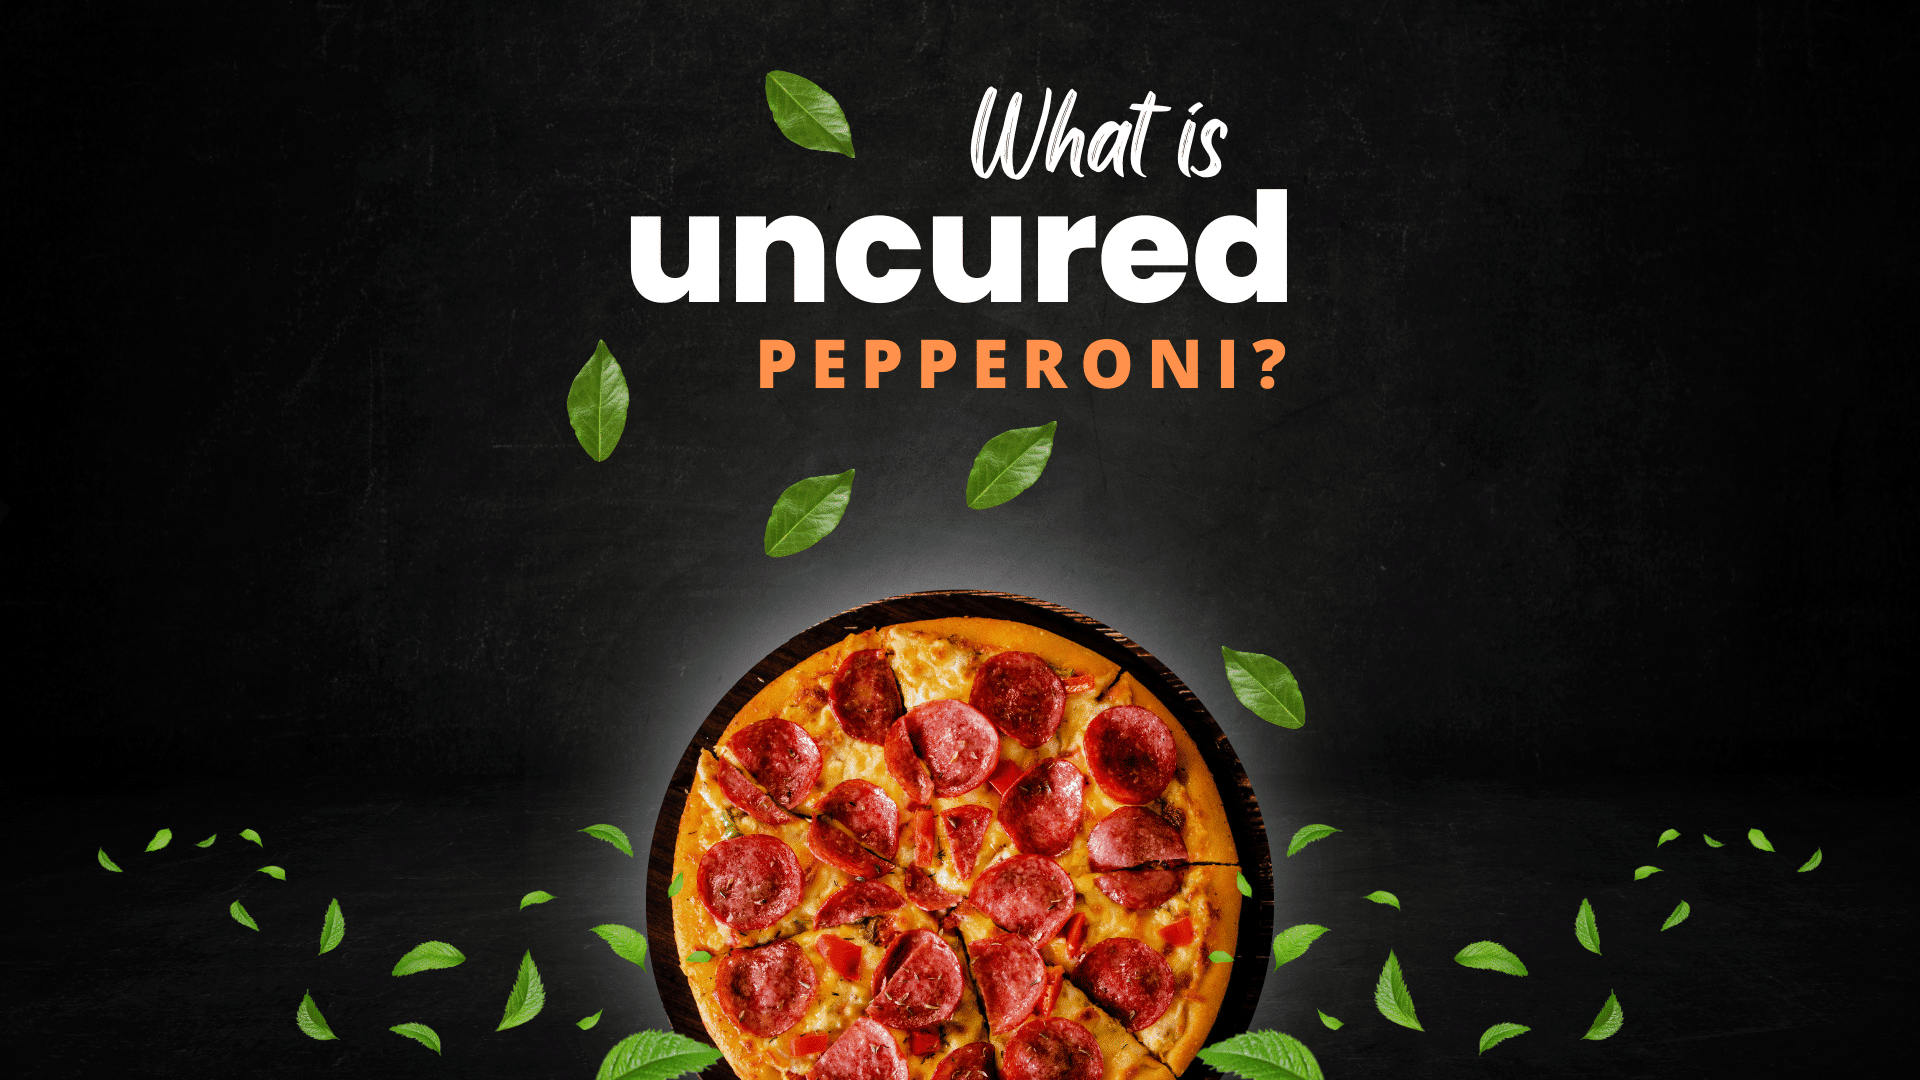 What is uncured pepperoni